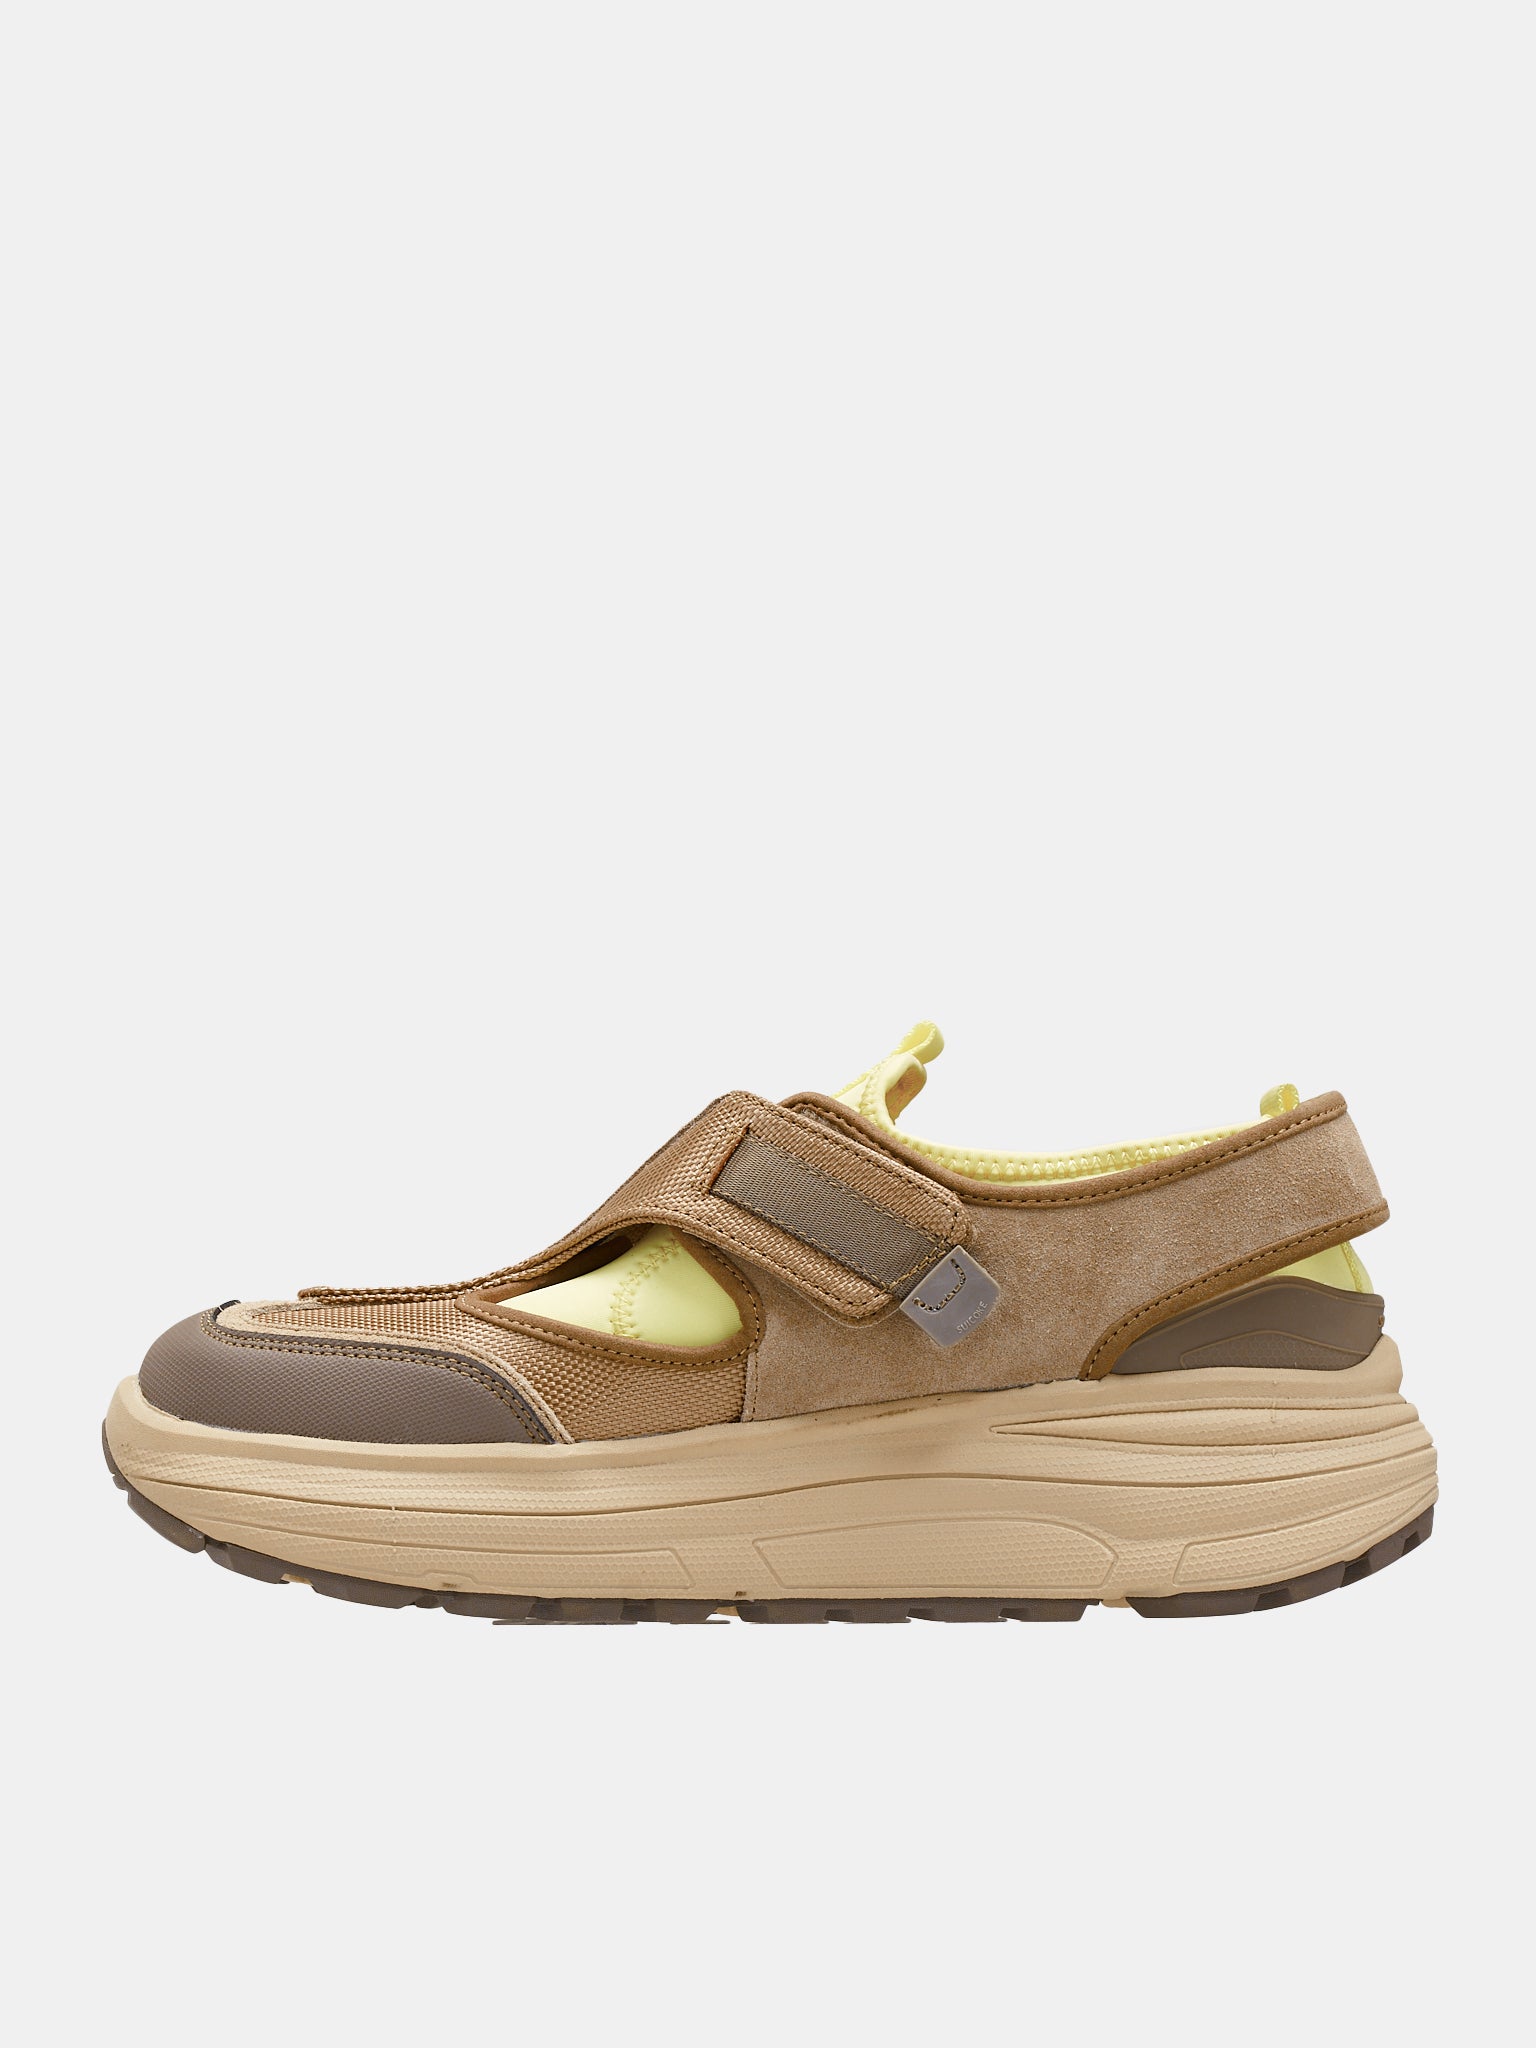 Tred Sneakers (OG-349-BEIGE-YELLOW)